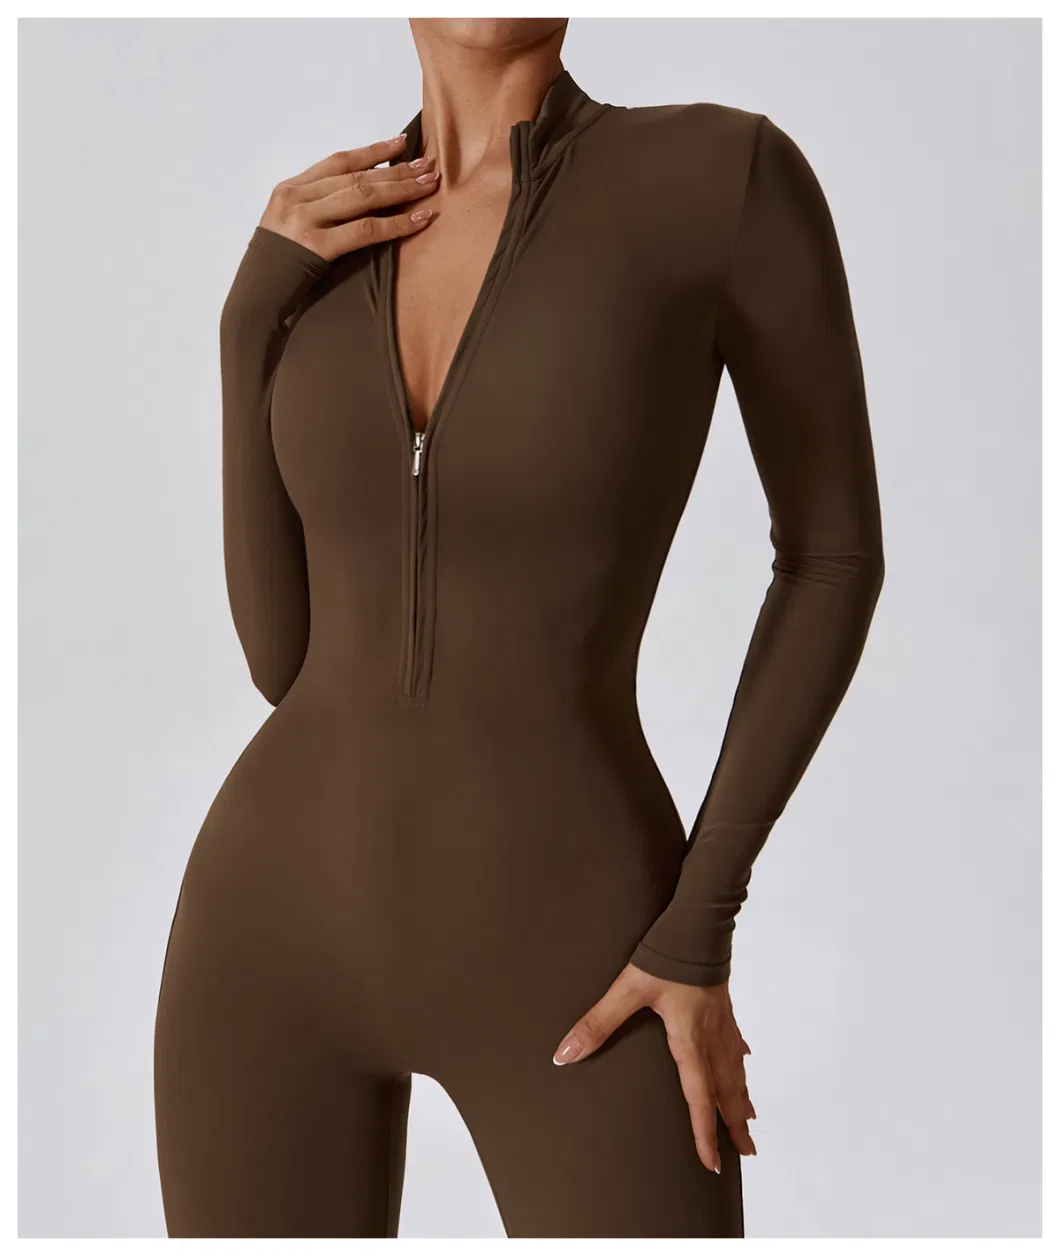 Factory Wholesale Long Sleeve Zip up Full Length Romper Playsuit Bodycon Unitard One Piece Yoga Workout Fitness Jumpsuit